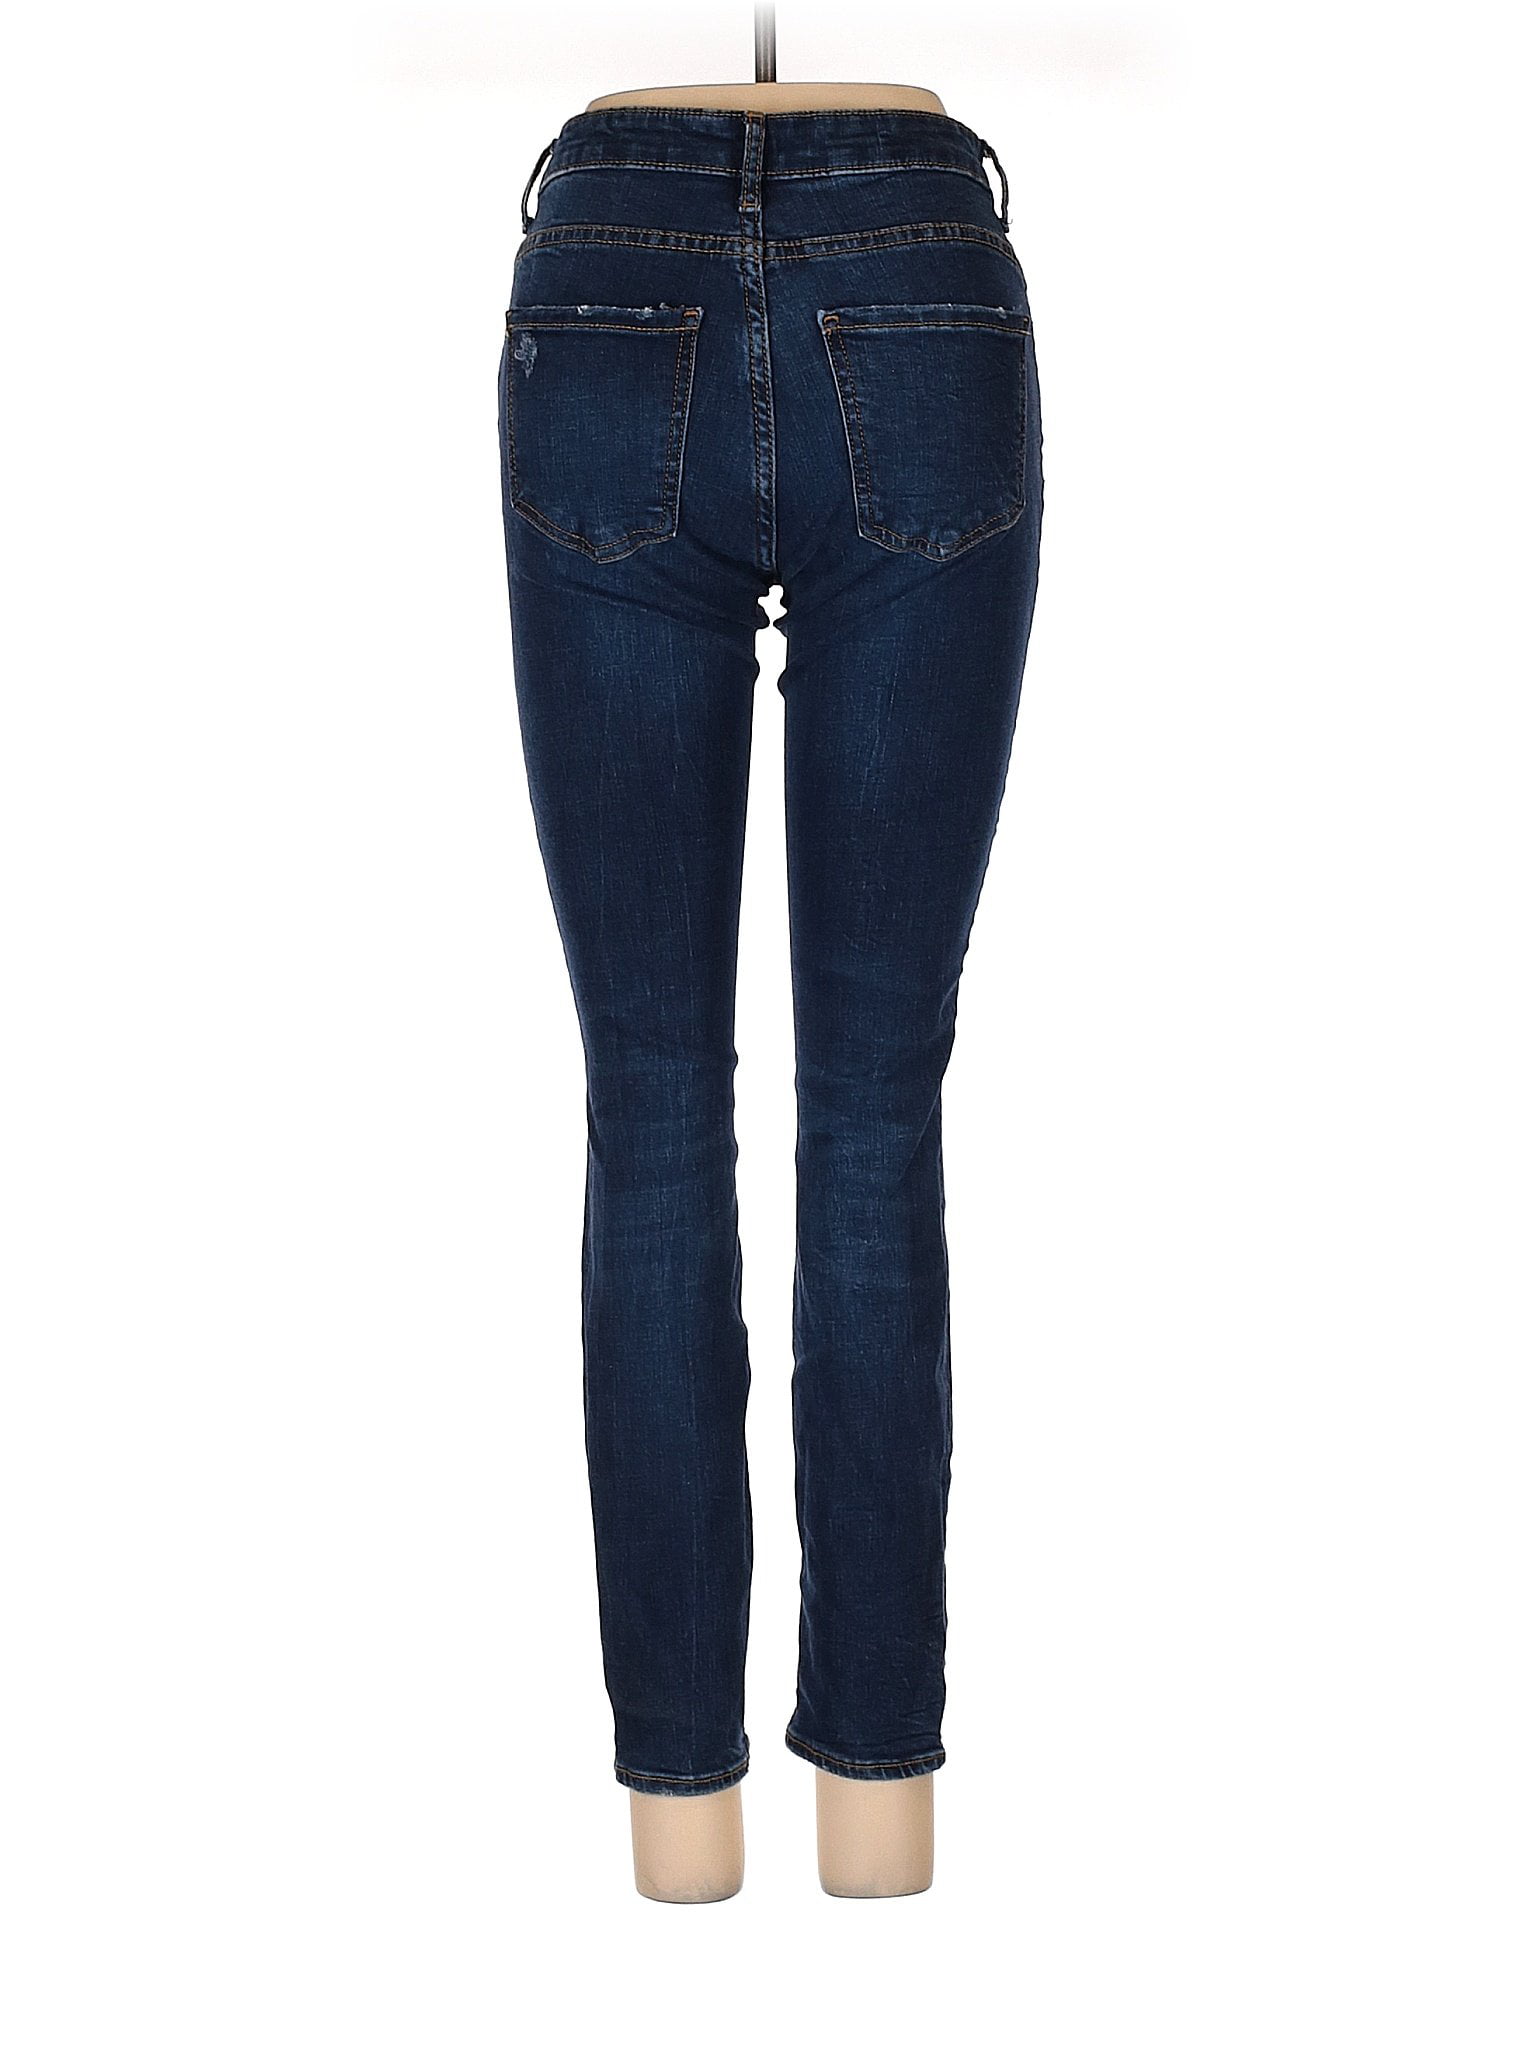 Buy Pre-Owned Zara Women's Size 6 Jeans Online at Lowest Price in Ubuy ...